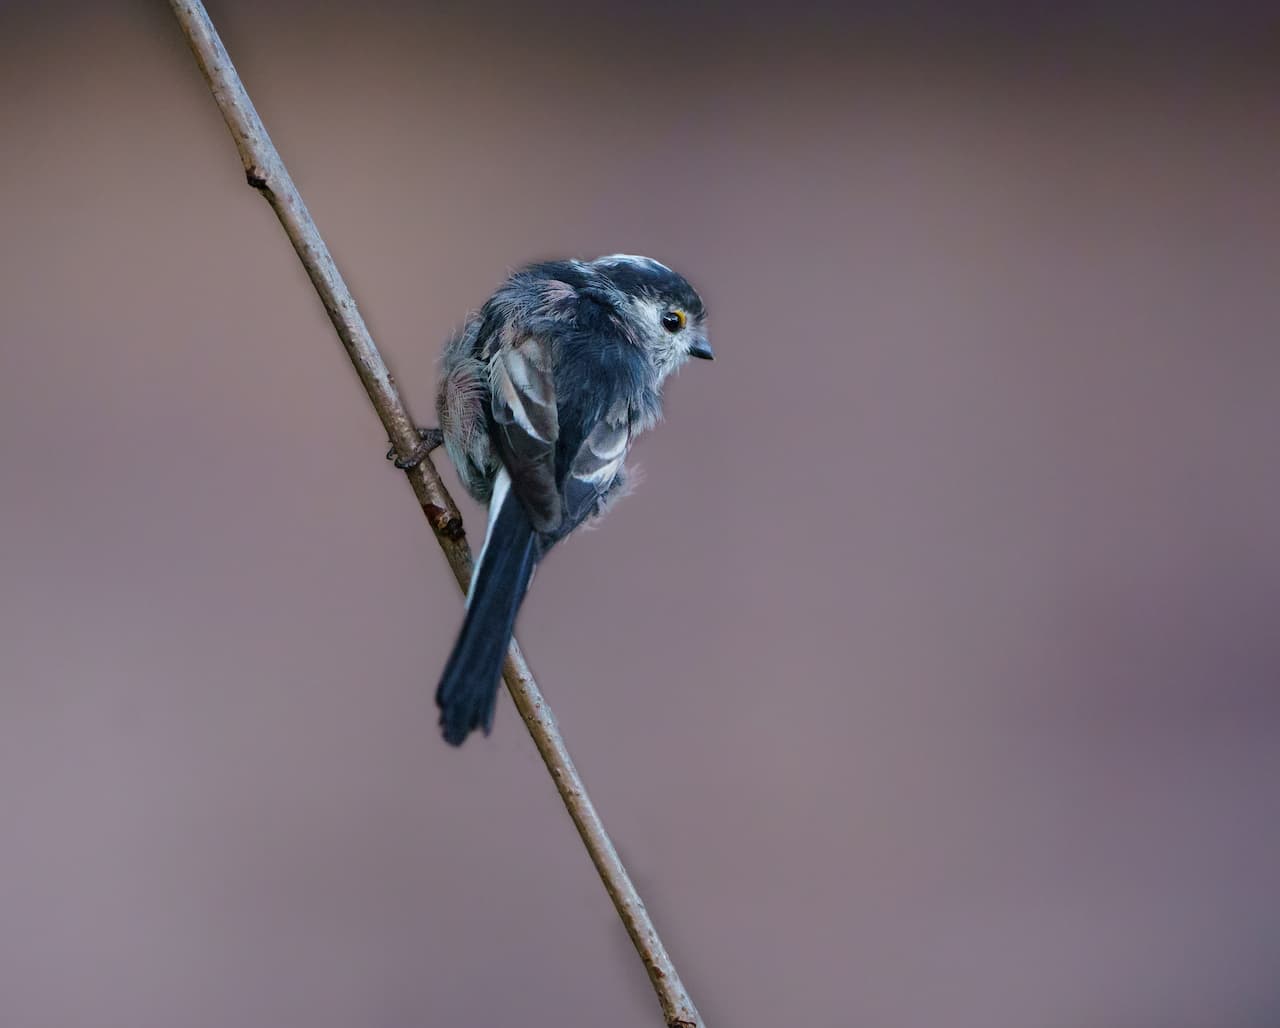 The Long-tailed Tit Perched In The Thorn Of A Tree